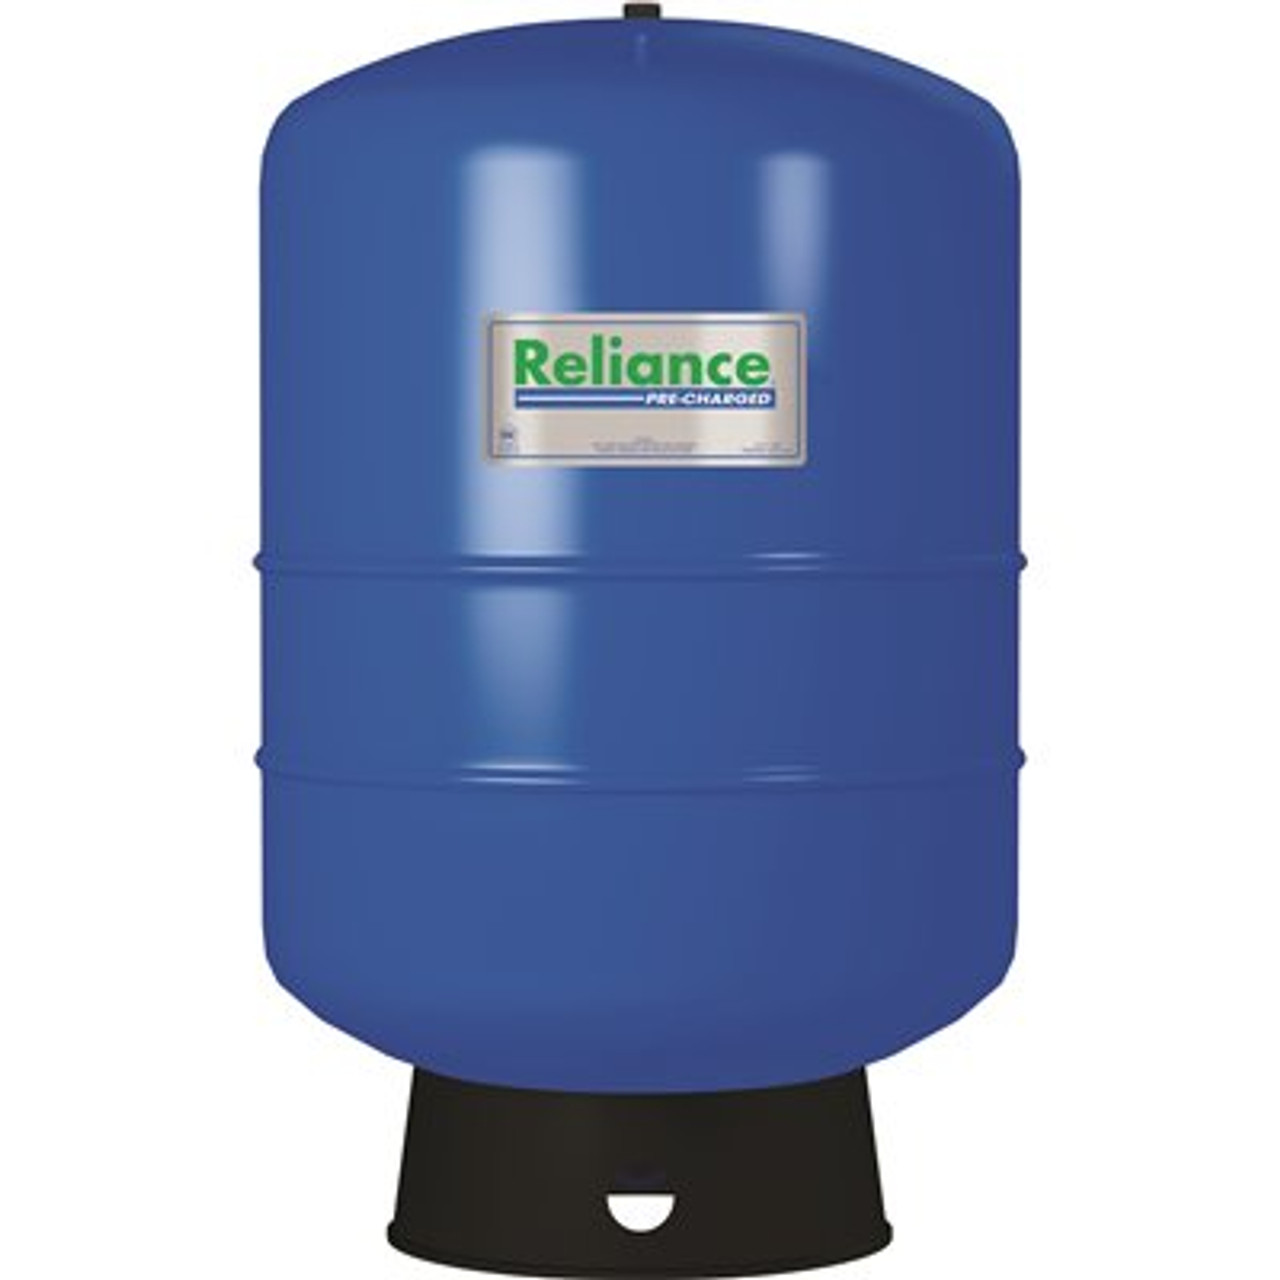 Reliance 36 Gal. Free-Standing Well/Pressure Tank